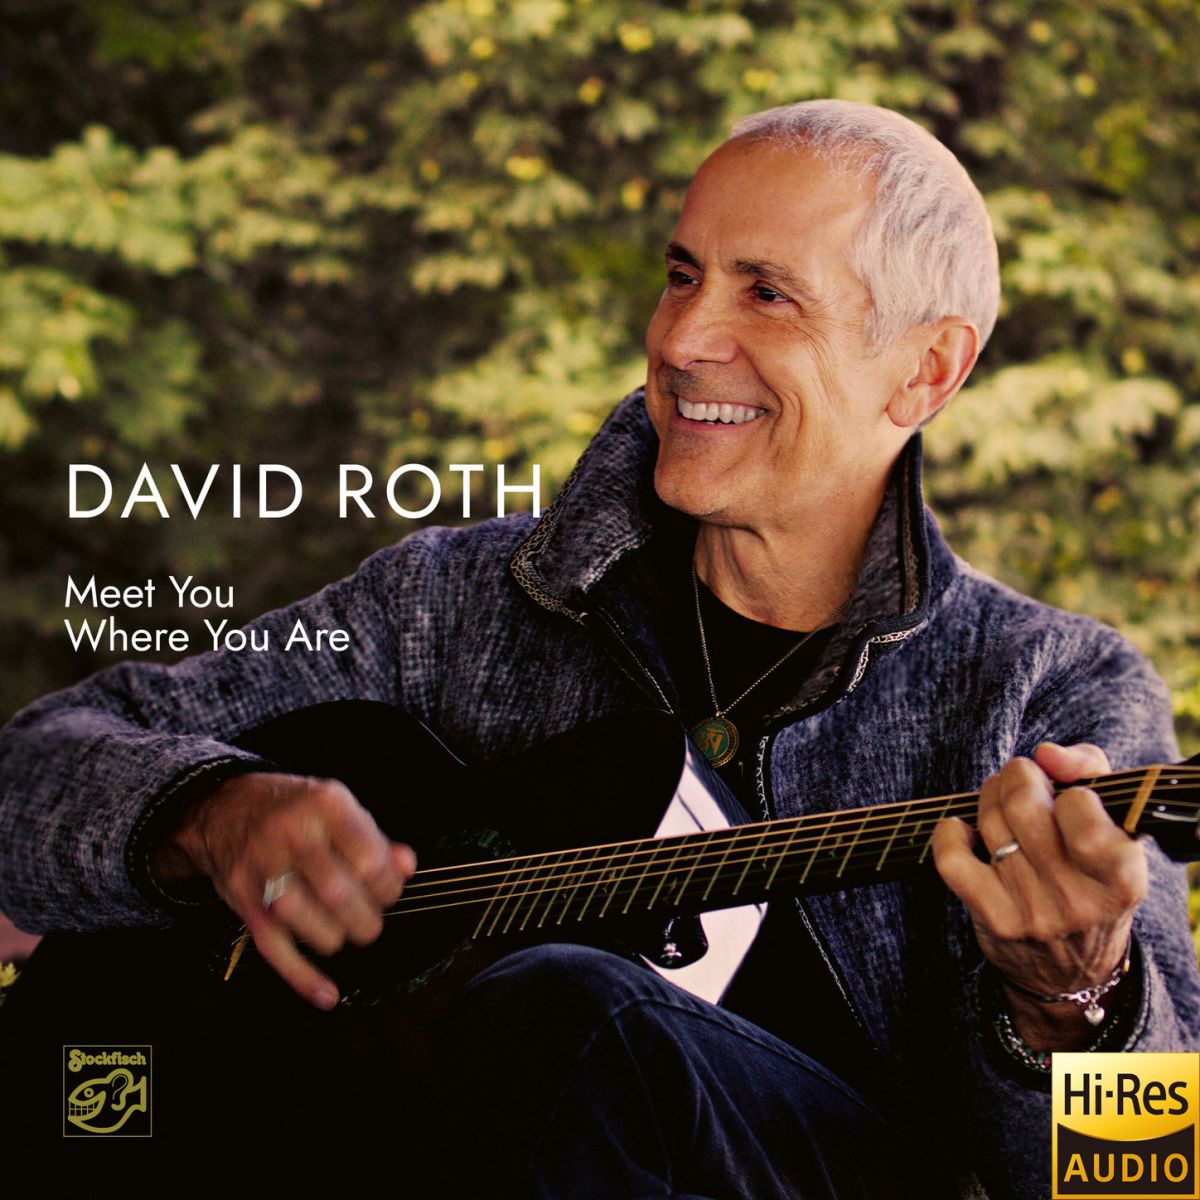 David Roth - Meet You Where You Are (24bit-88.2kHz)